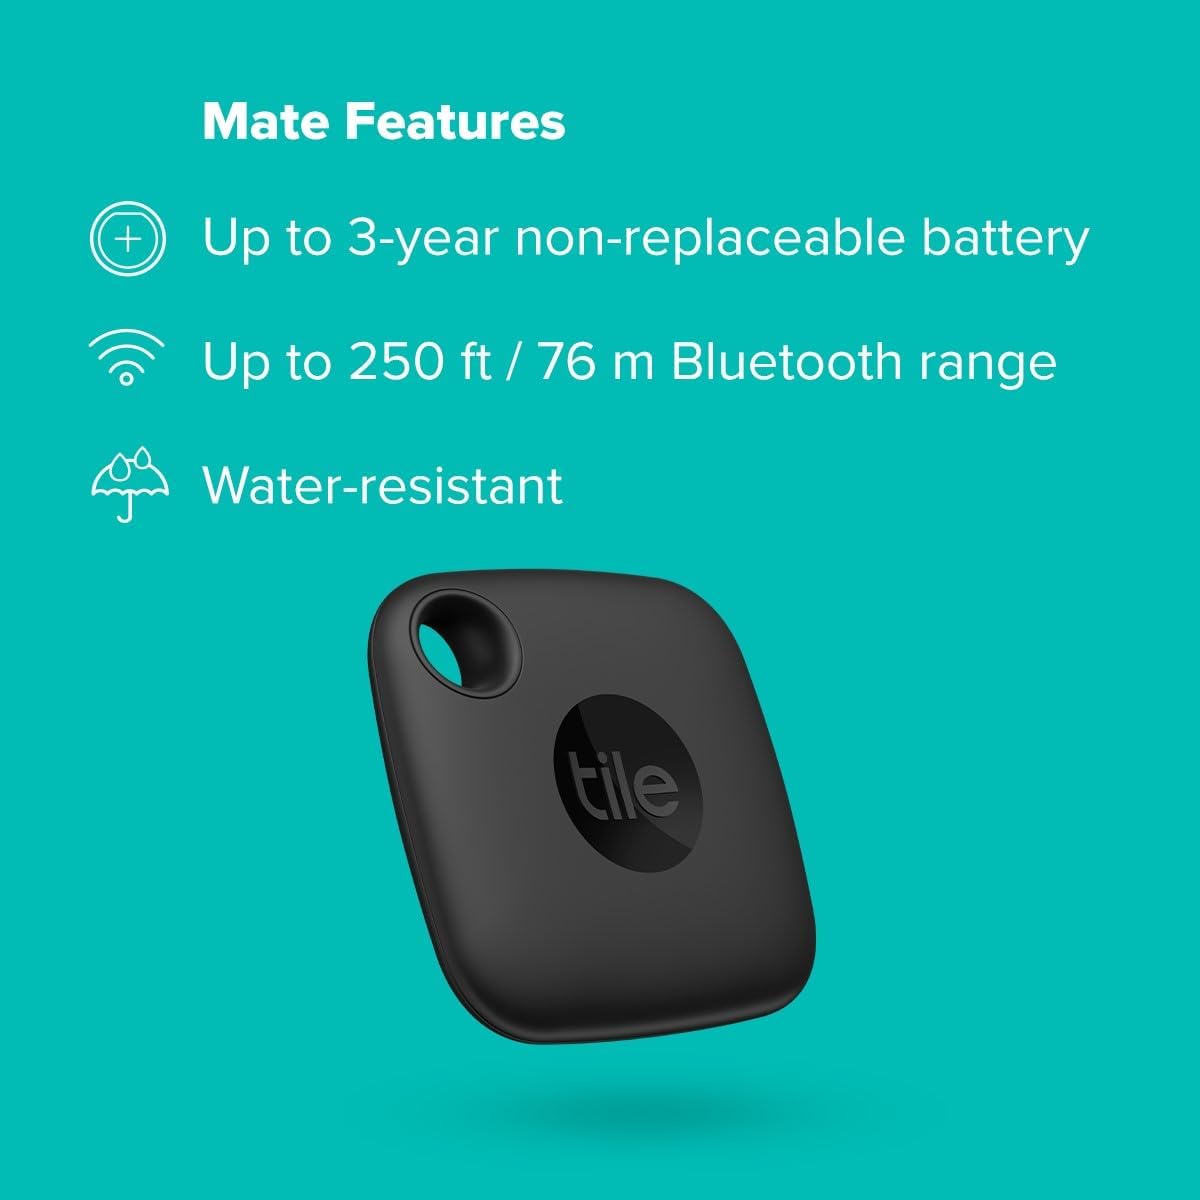 The image shows a black TileMate, which is a small Bluetooth tracker device designed to help locate personal items like keys, wallets, bags, or other items to which it can be attached. The image also lists some of the features of the Tile Mate, including:
1. Up to 3-year non-replaceable battery
2. Up to 250 ft / 76 m Bluetooth range
3. Water-resistant
The background is a solid teal color, and the text and icons are white, contrasting well with the background for easy reading. The Tile logo is visible on the device, indicating the brand.